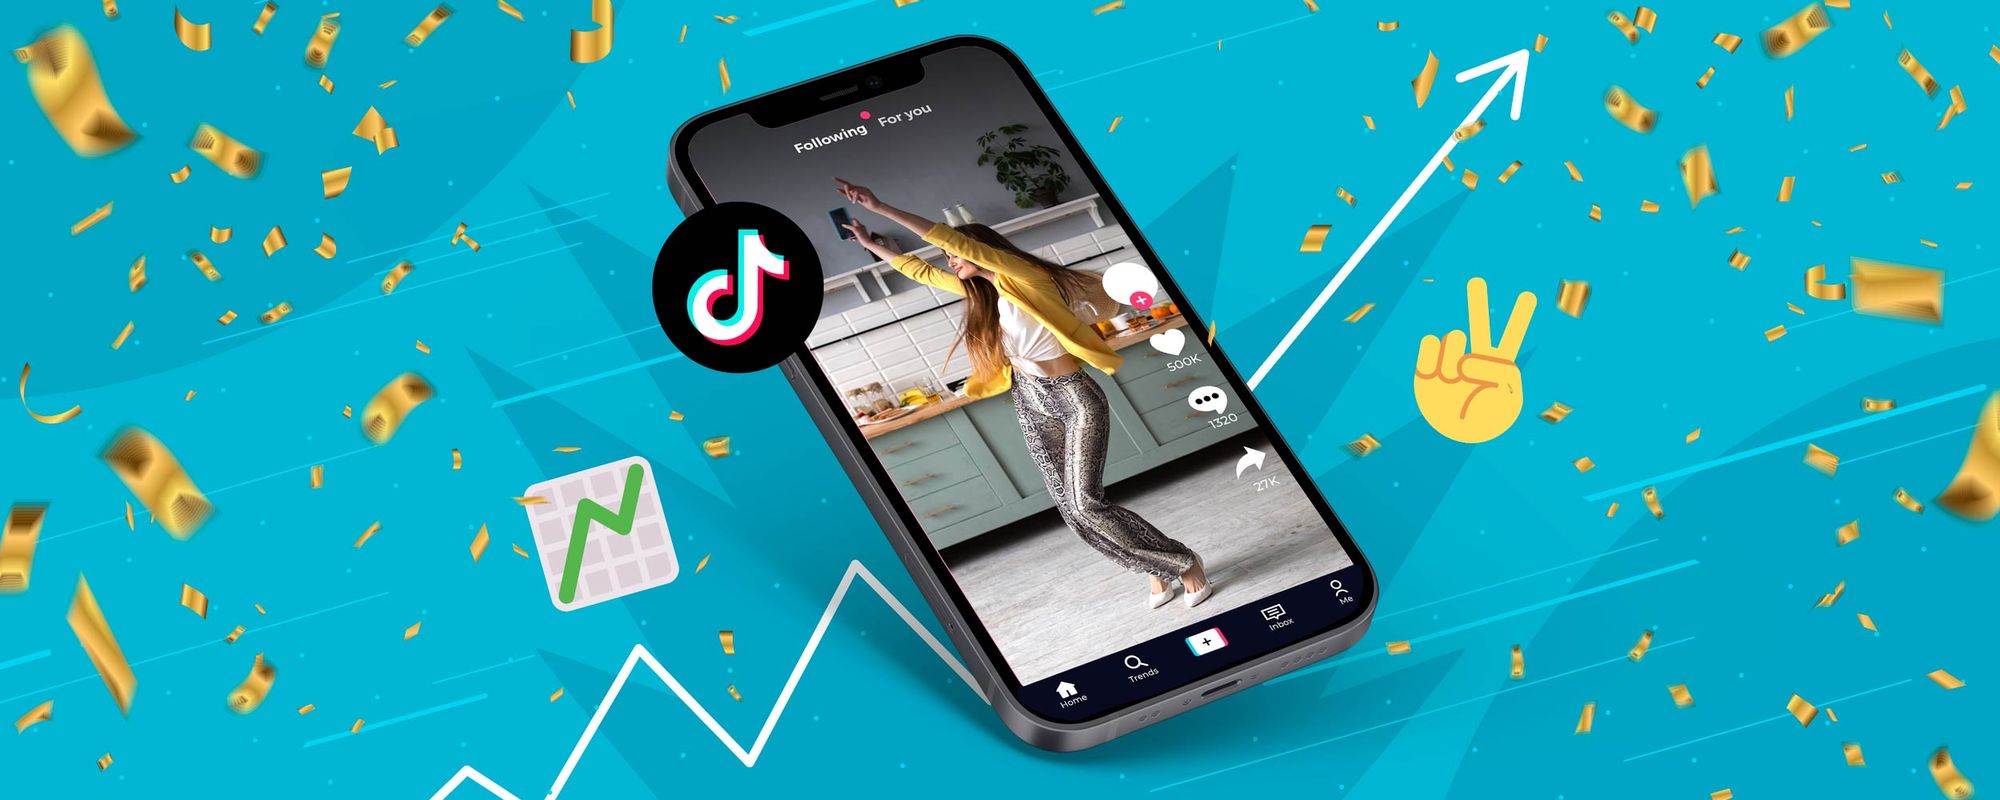 Image showing a TikTok video with icons showing that it is going viral.